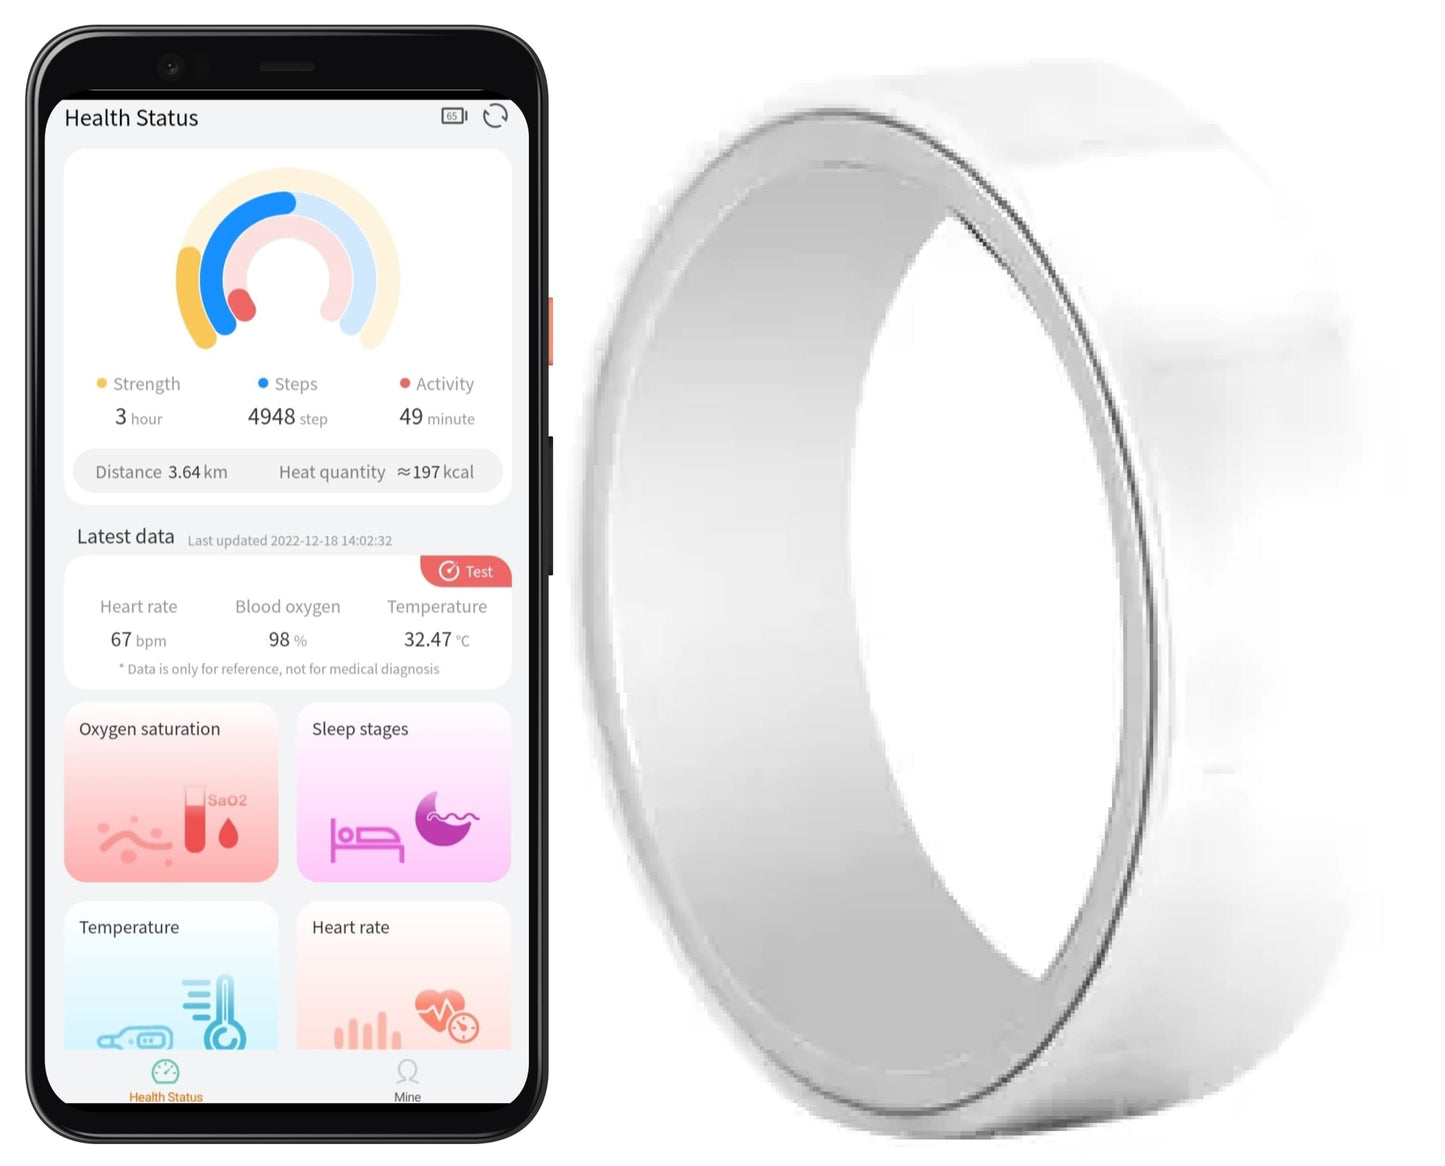 TUITT Sleep Tracker Smart Ring, Fitness Tracker Ring, Health Smart Ring, Sleep Ring with Heart Rate Monitor, Thermometer, Pedometer and Step Counter